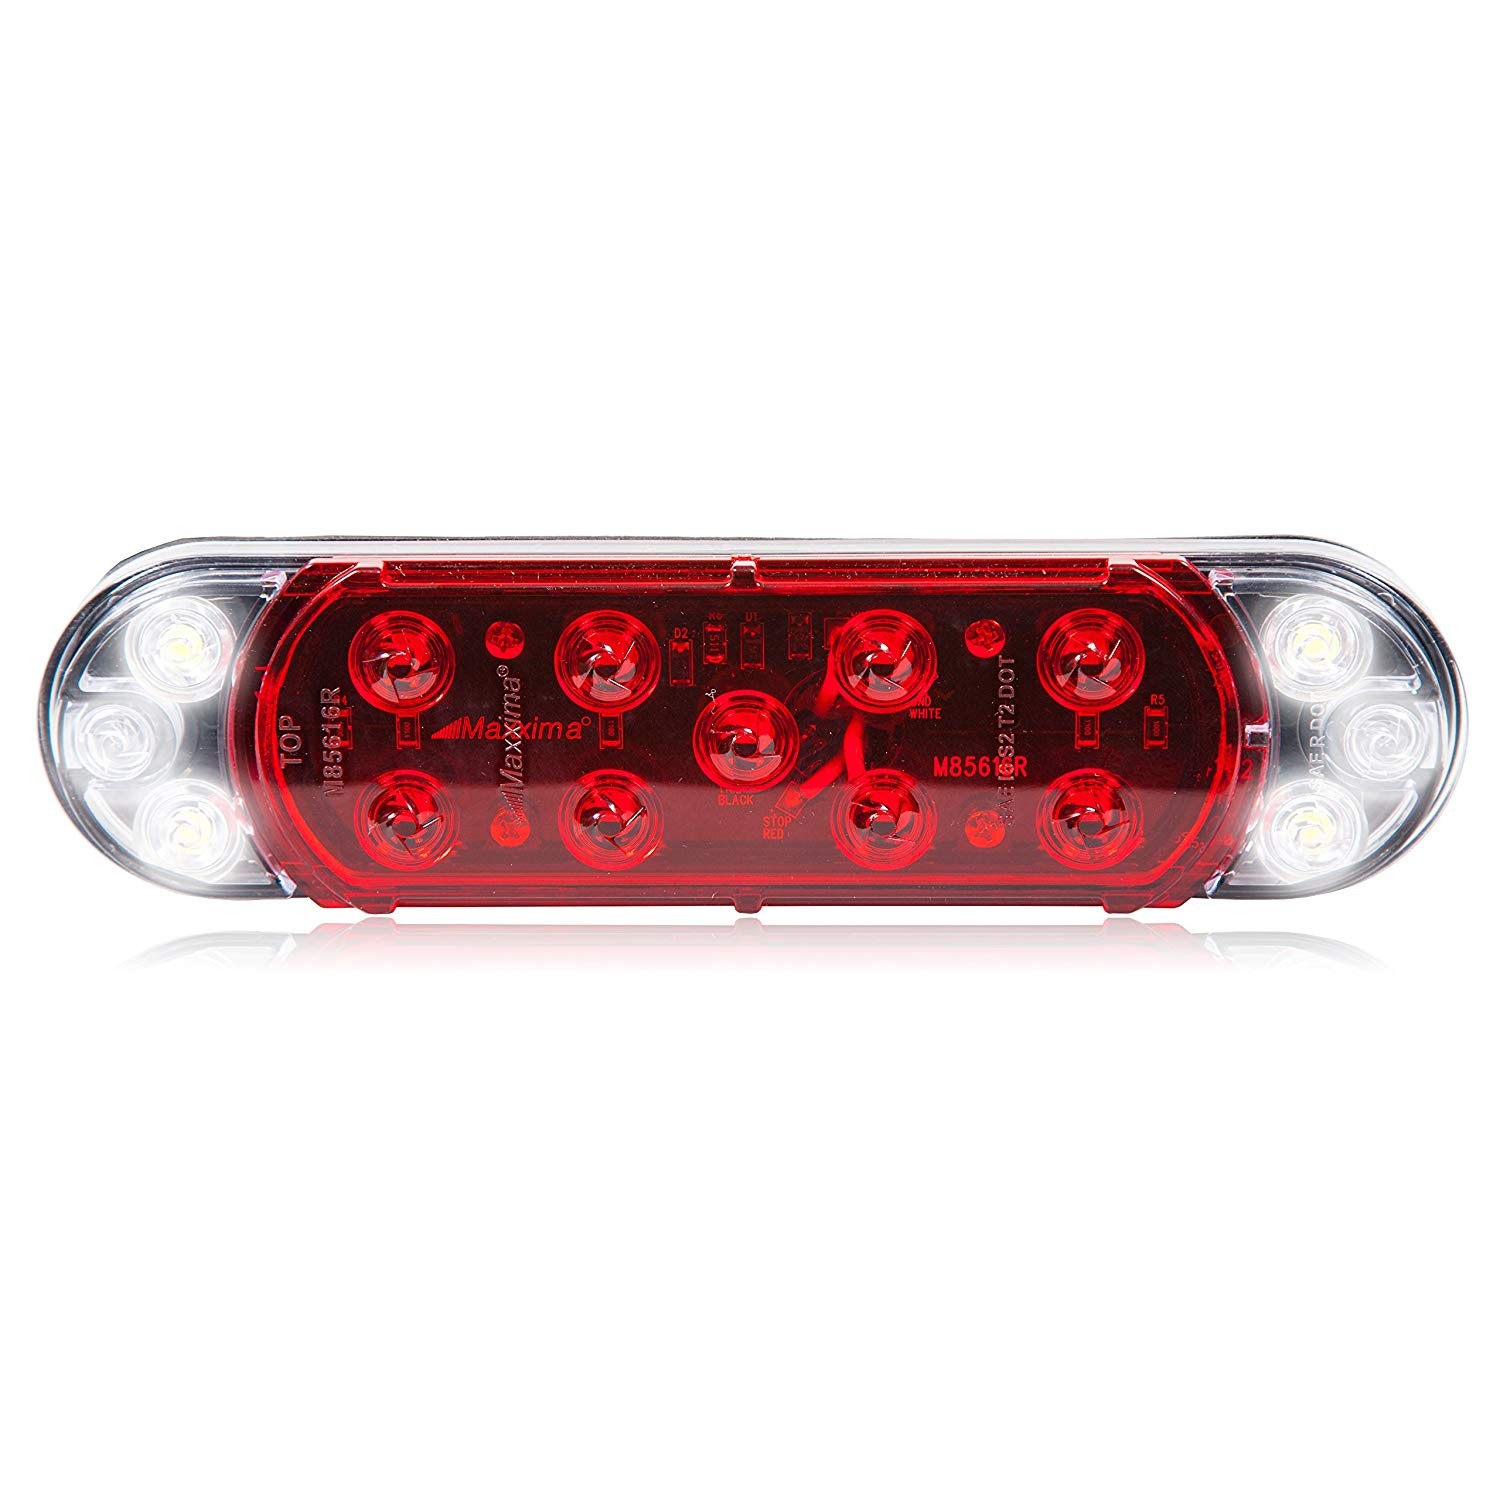 Amazon Maxxima M R Red White Hybrid LightningS LED Oval Stop Tail Rear Turn and Back Up LED Light Automotive